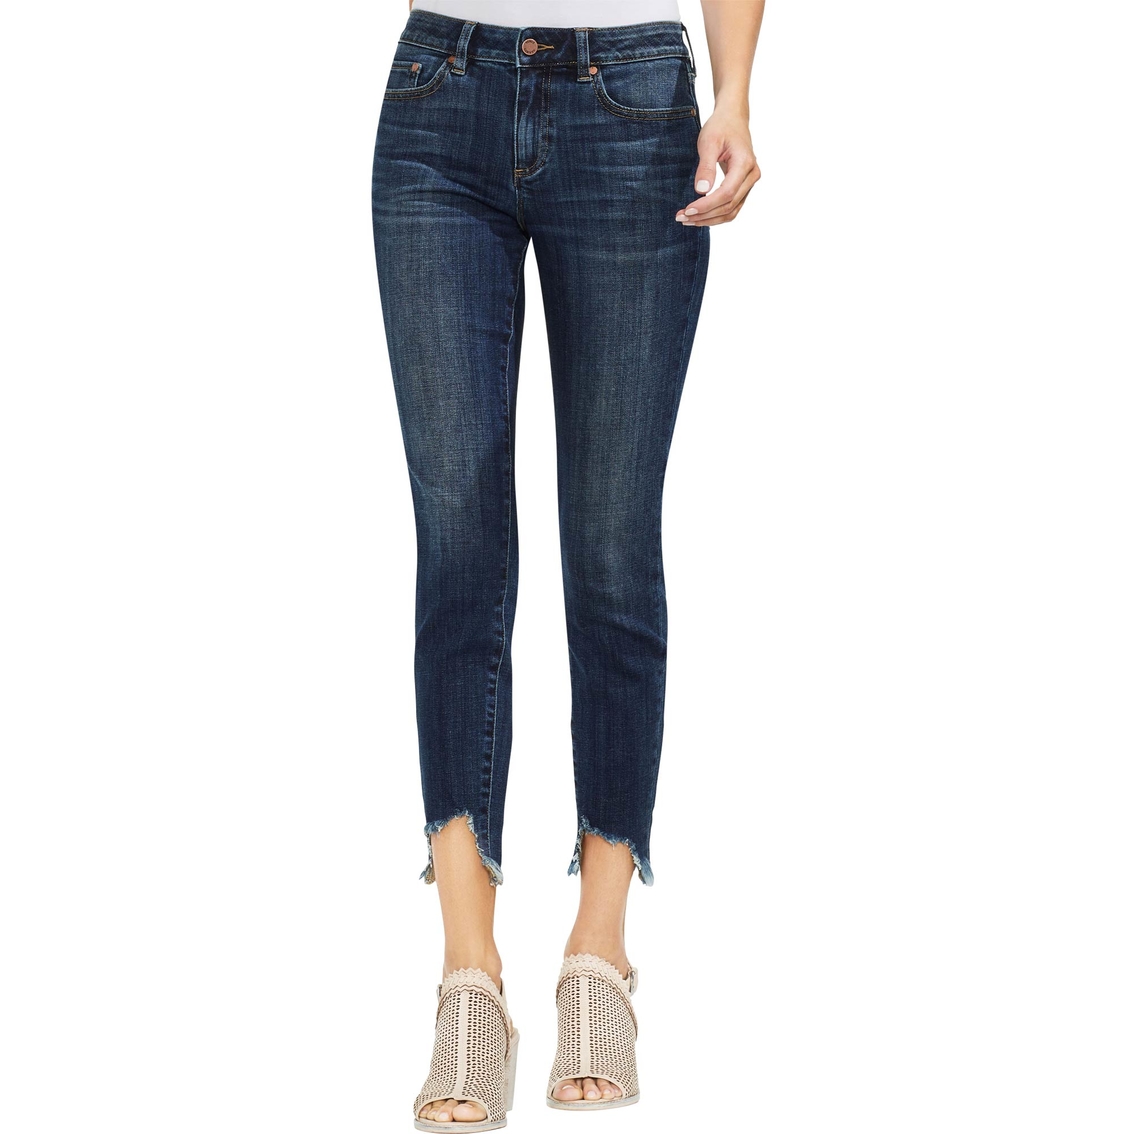 Vince Camuto Distressed Uneven Hem Jeans | Jeans | Clothing ...